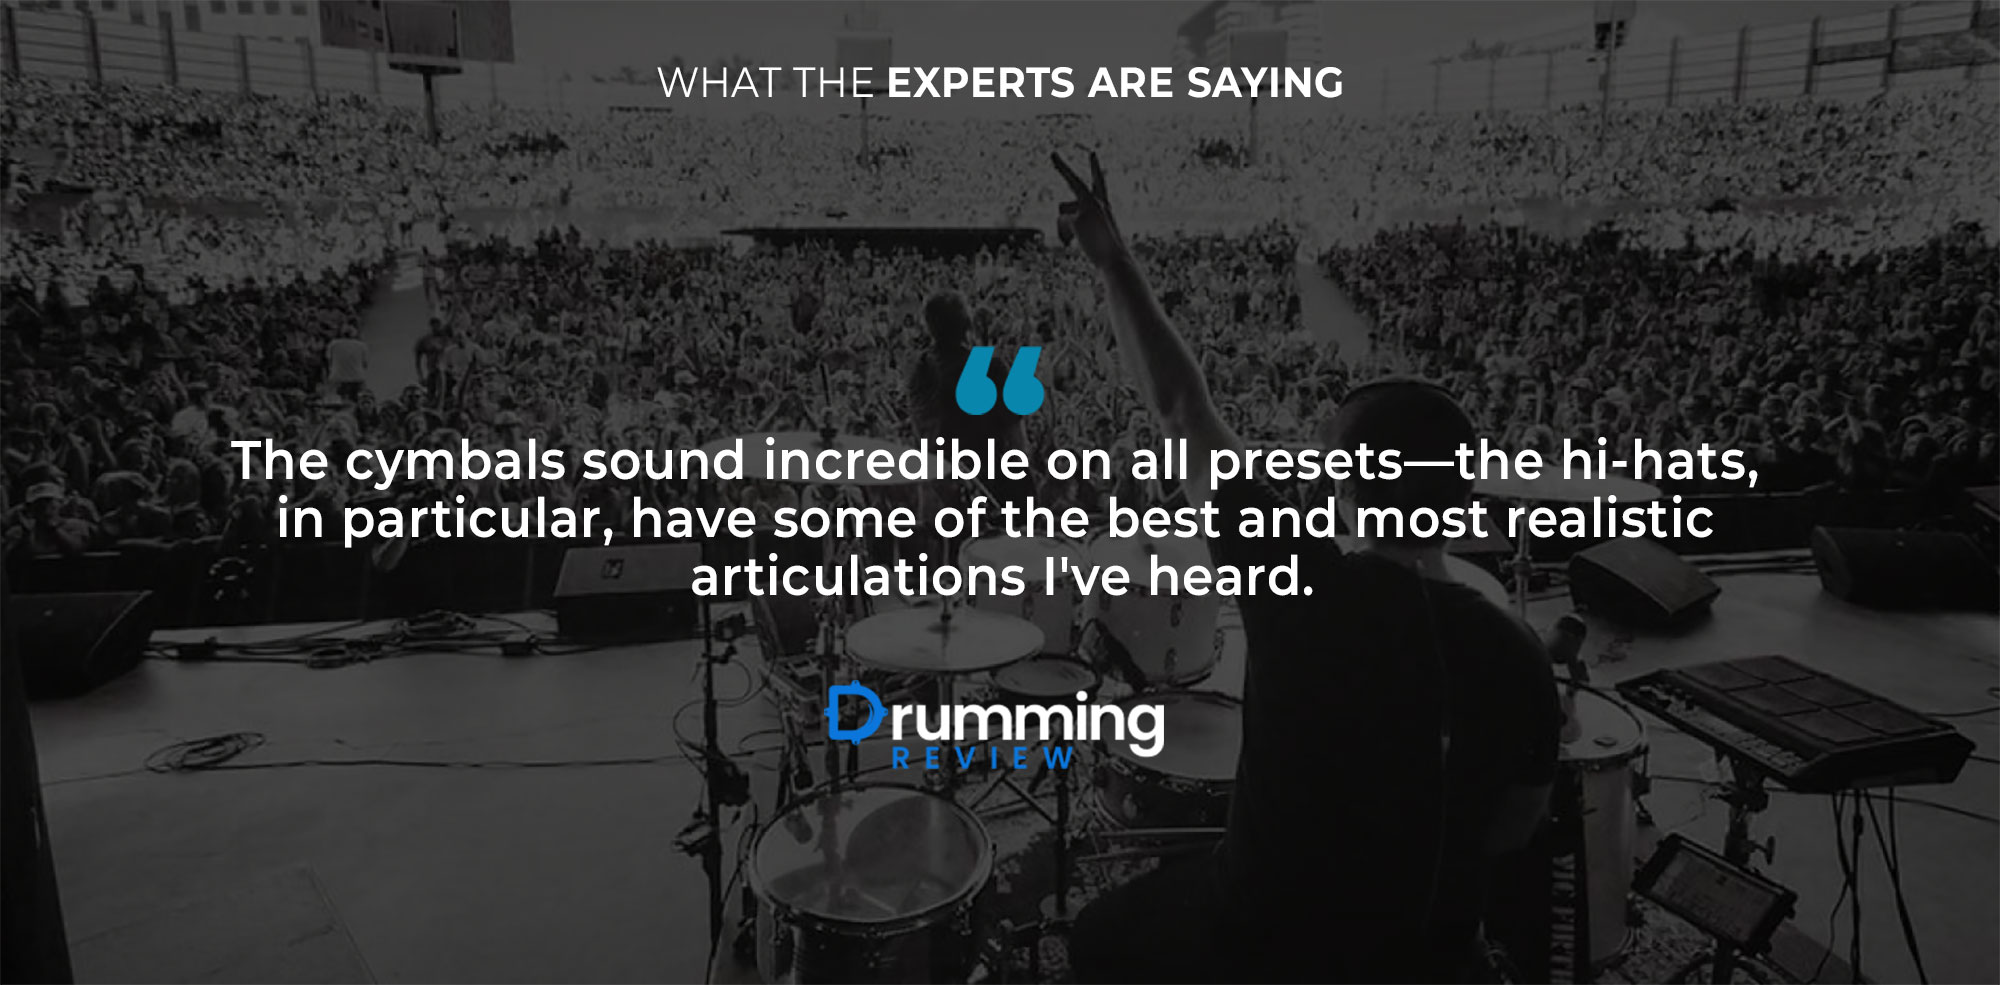 Drumming Review